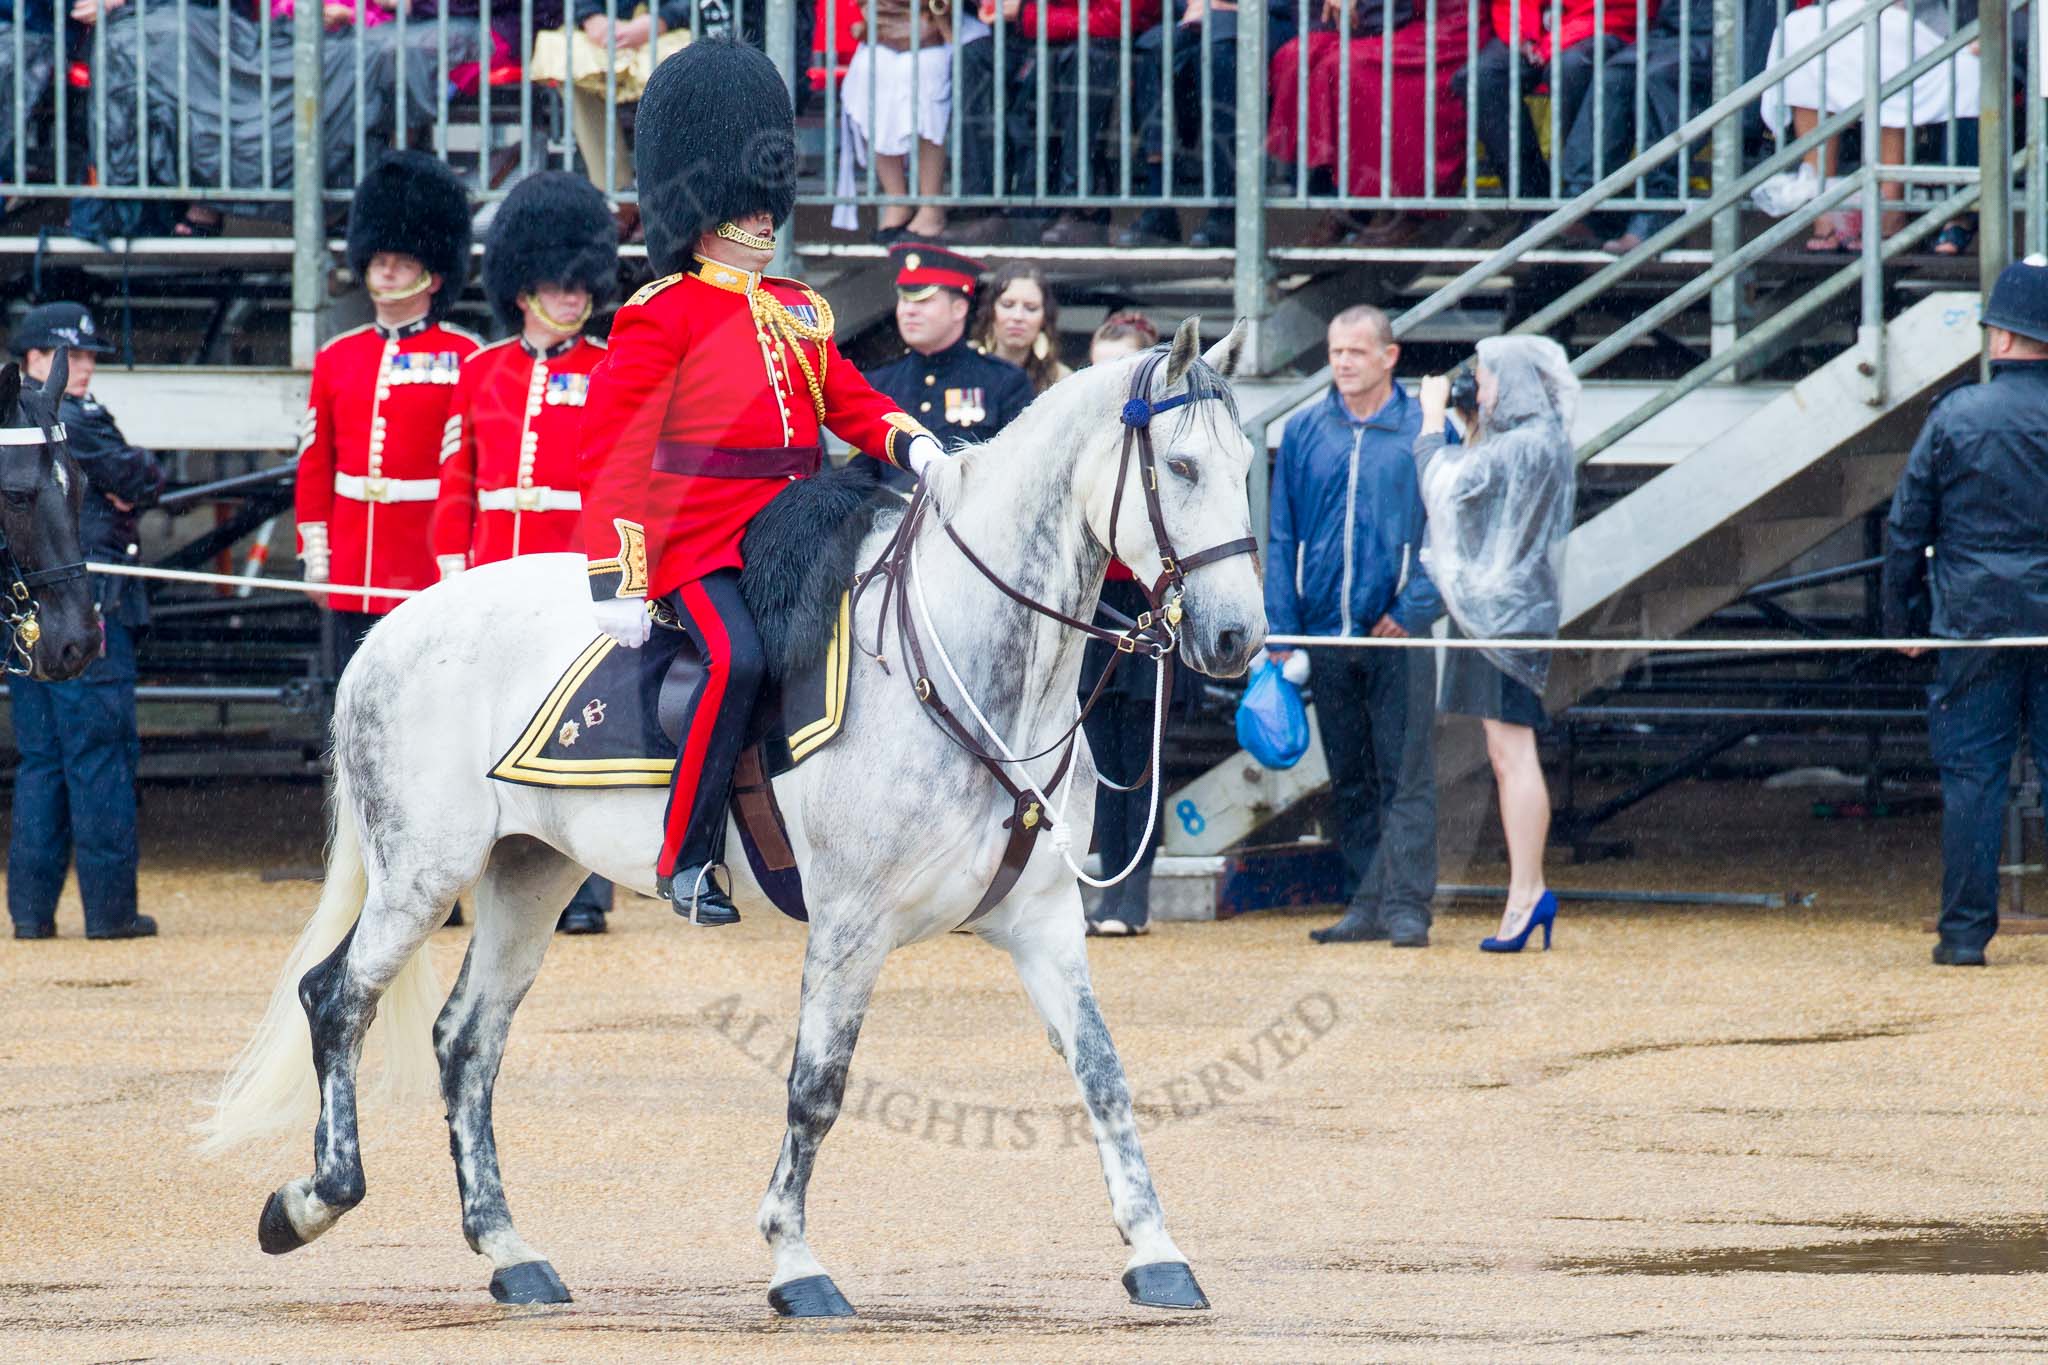 The Colonel's Review 2014.
Horse Guards Parade, Westminster,
London,

United Kingdom,
on 07 June 2014 at 10:56, image #232